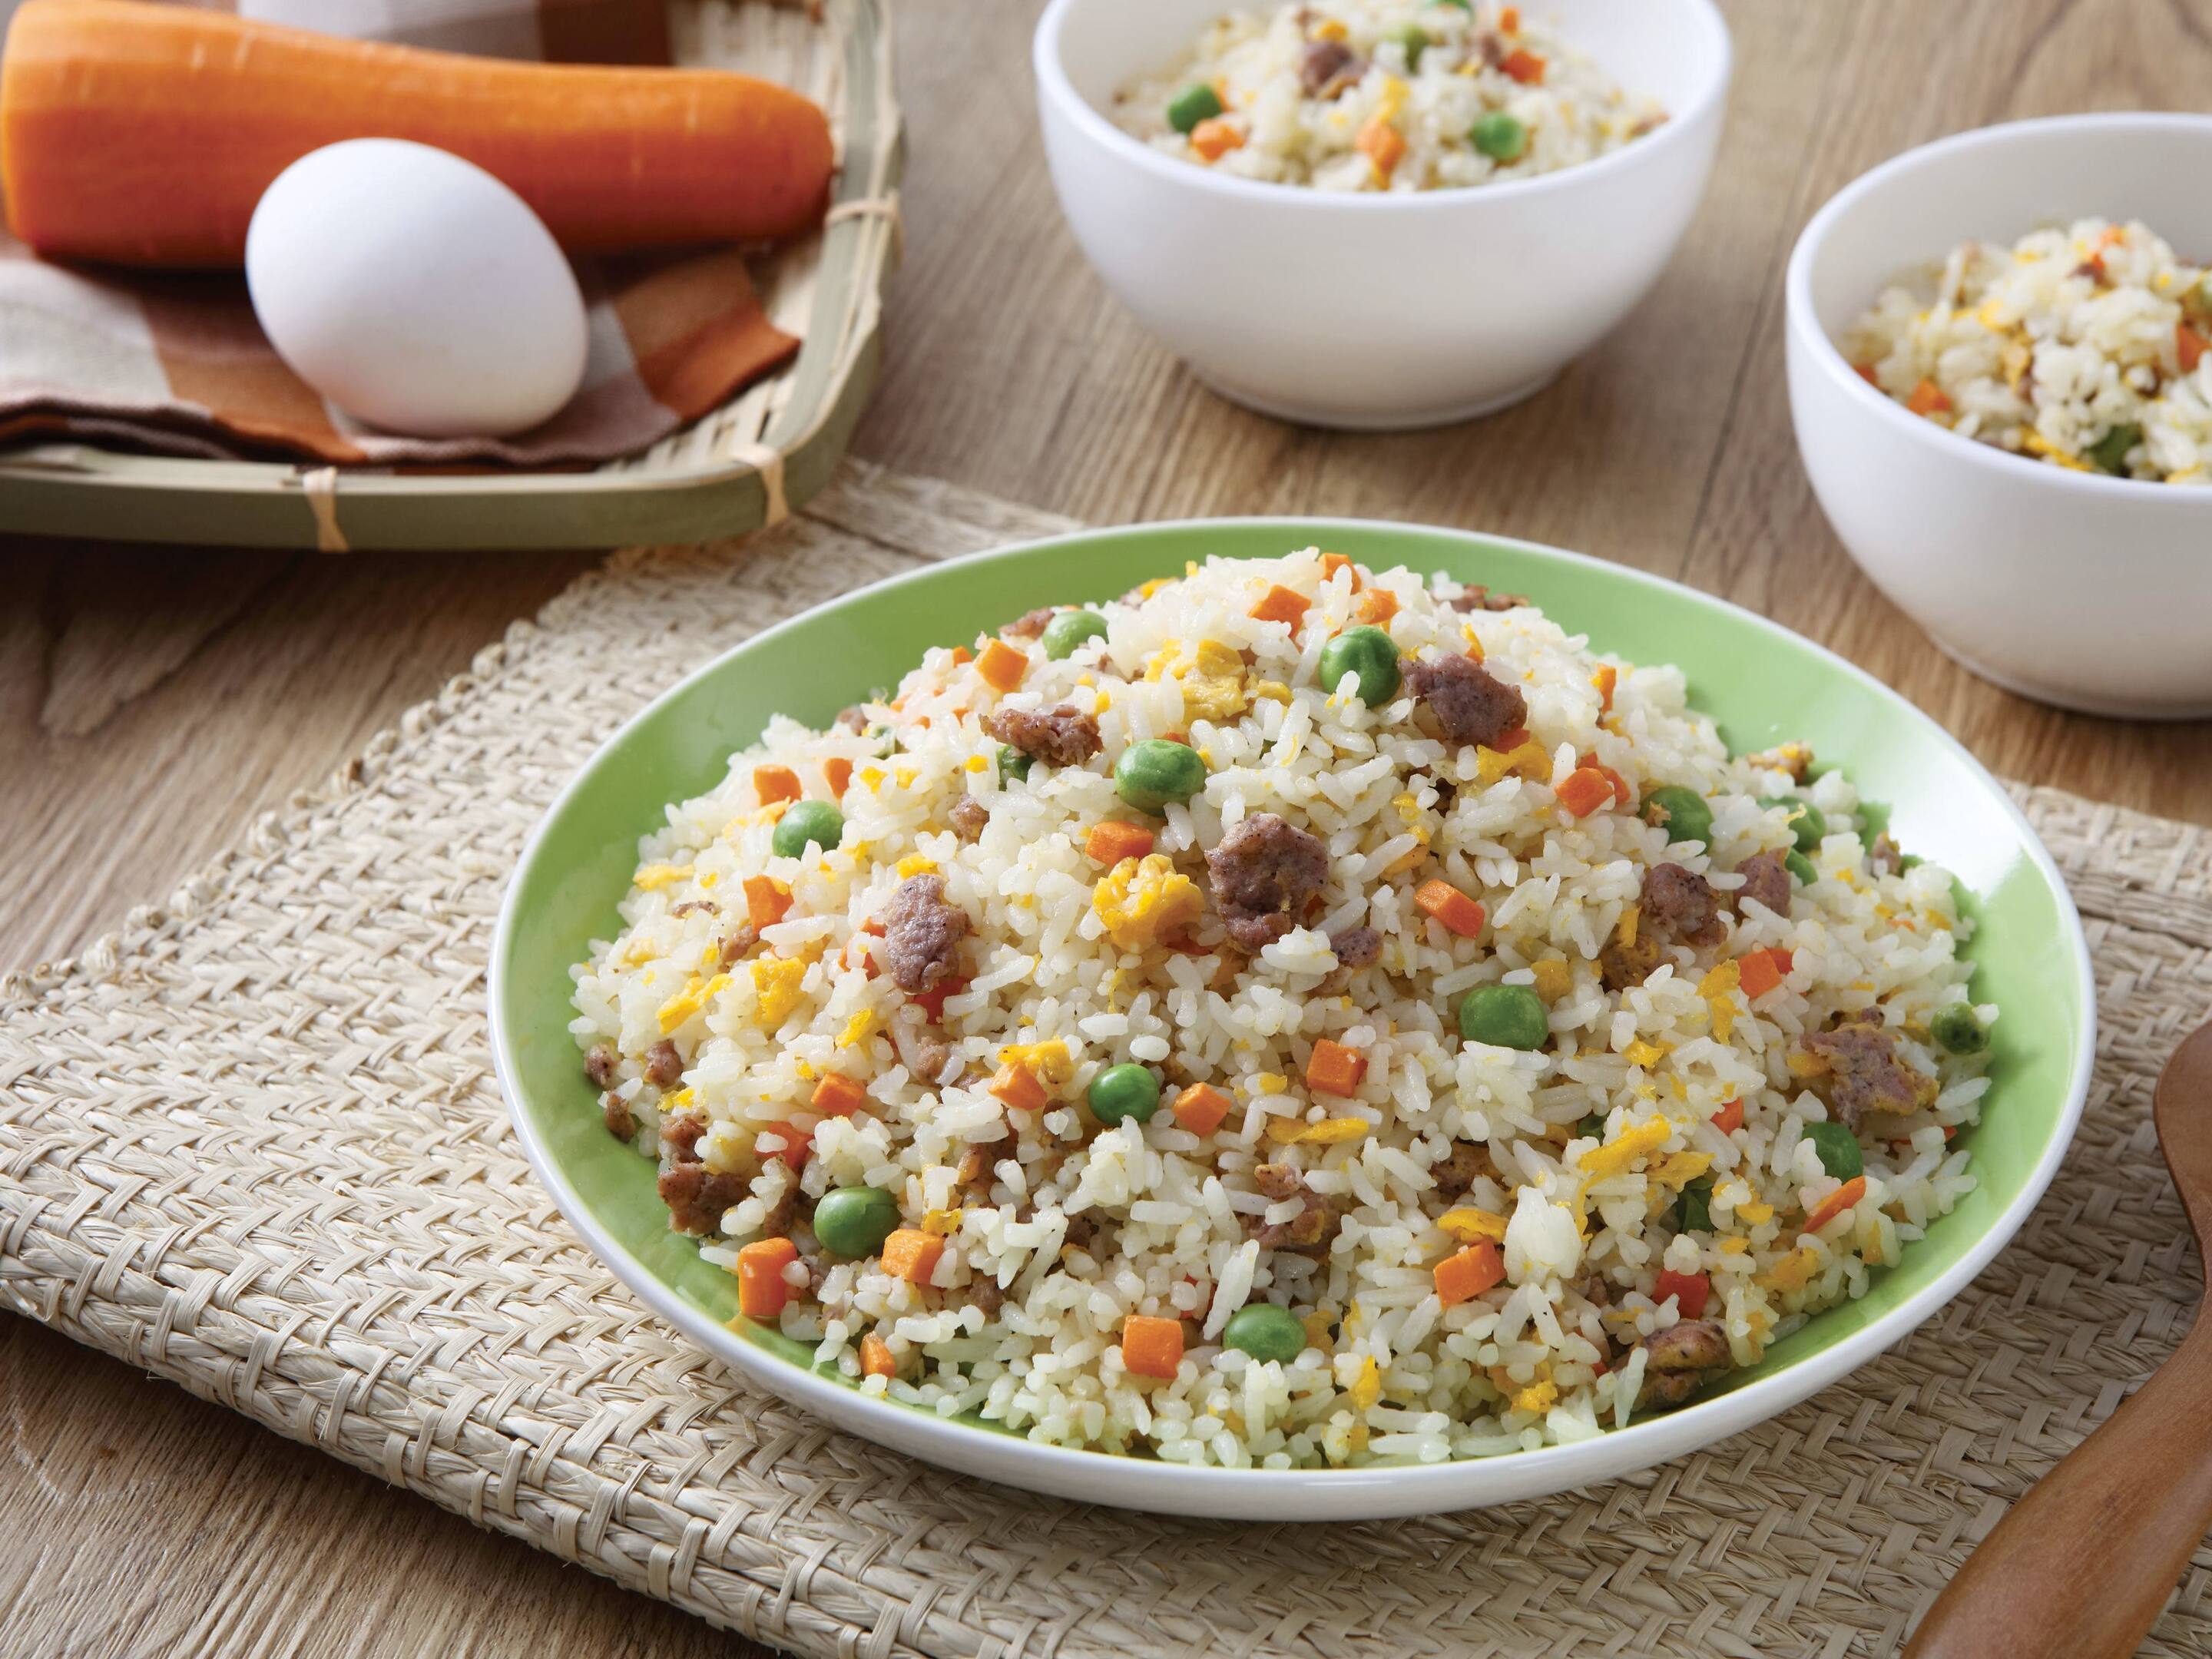 A plate of skinless longganisa fried rice with green peas, chopped carrots, and scrambled eggs